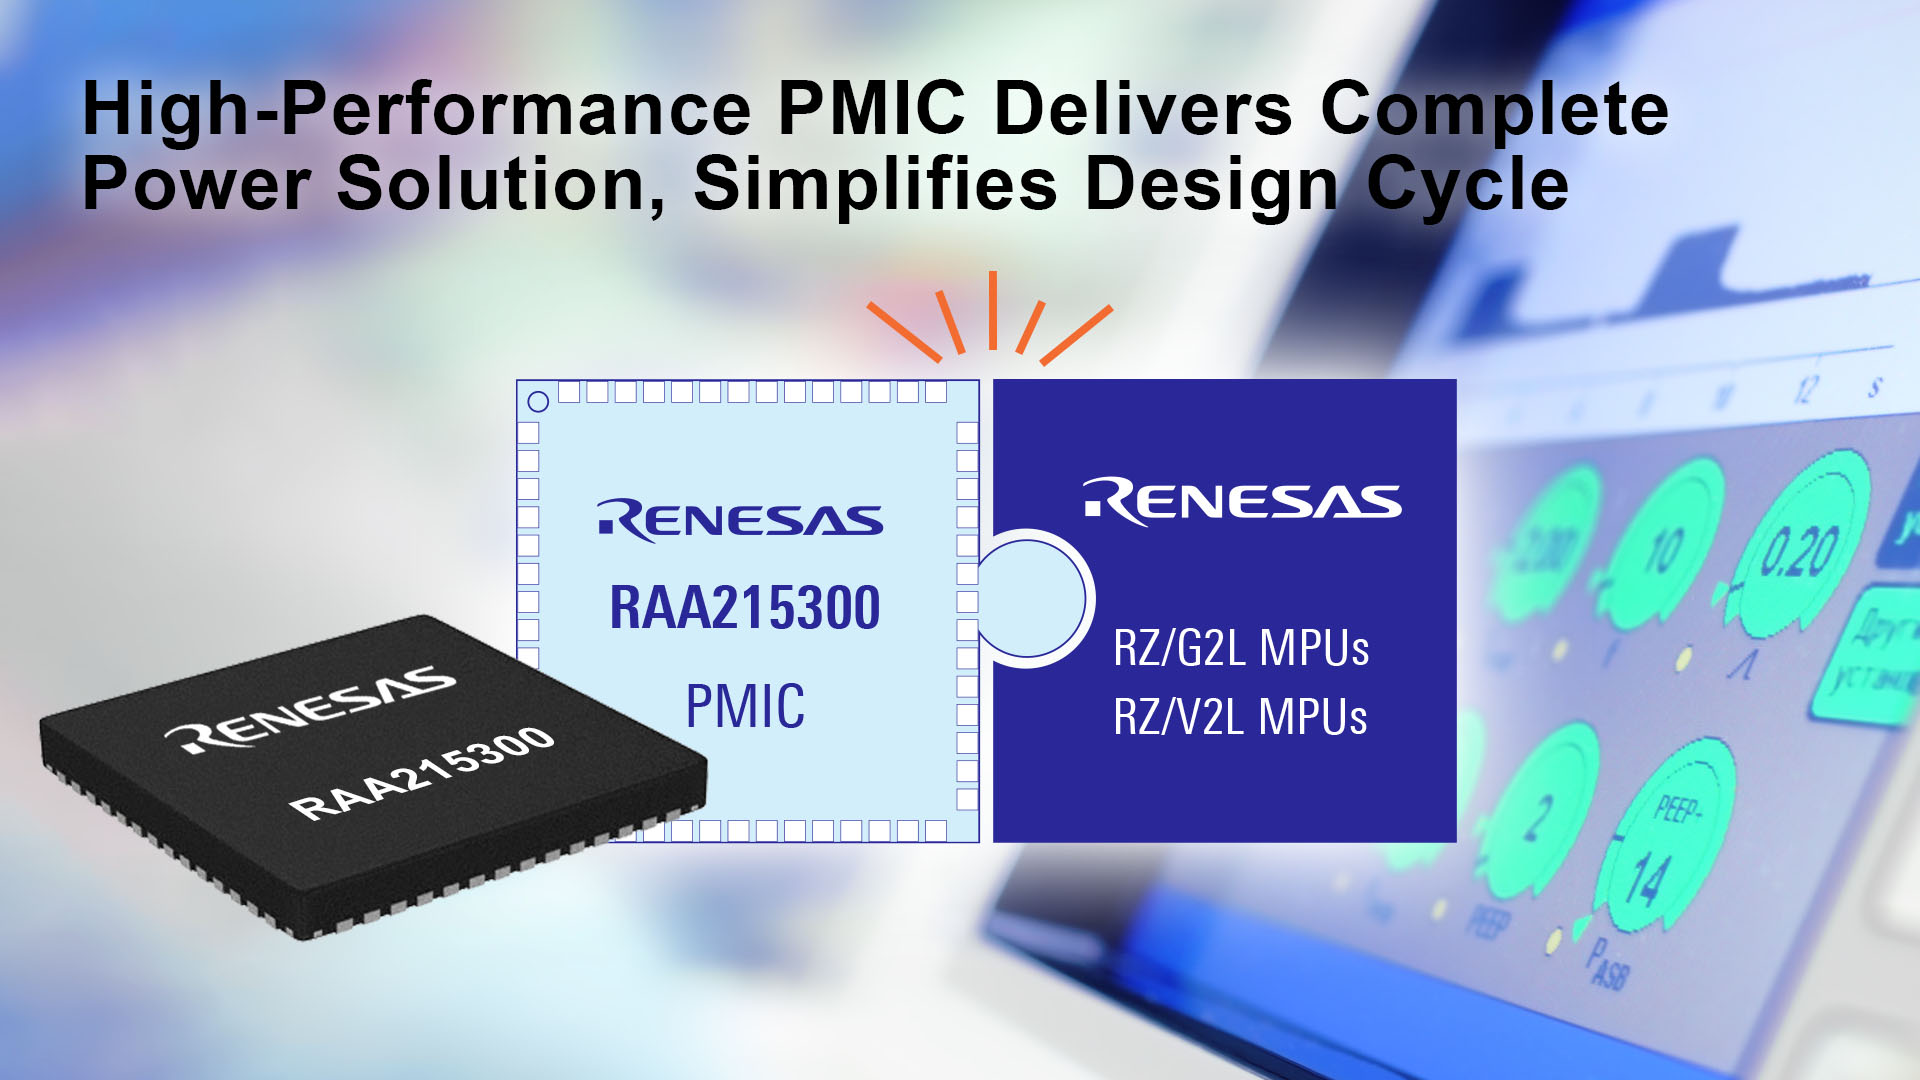 PMIC Delivers Complete Power Solution To Reduce Design Time